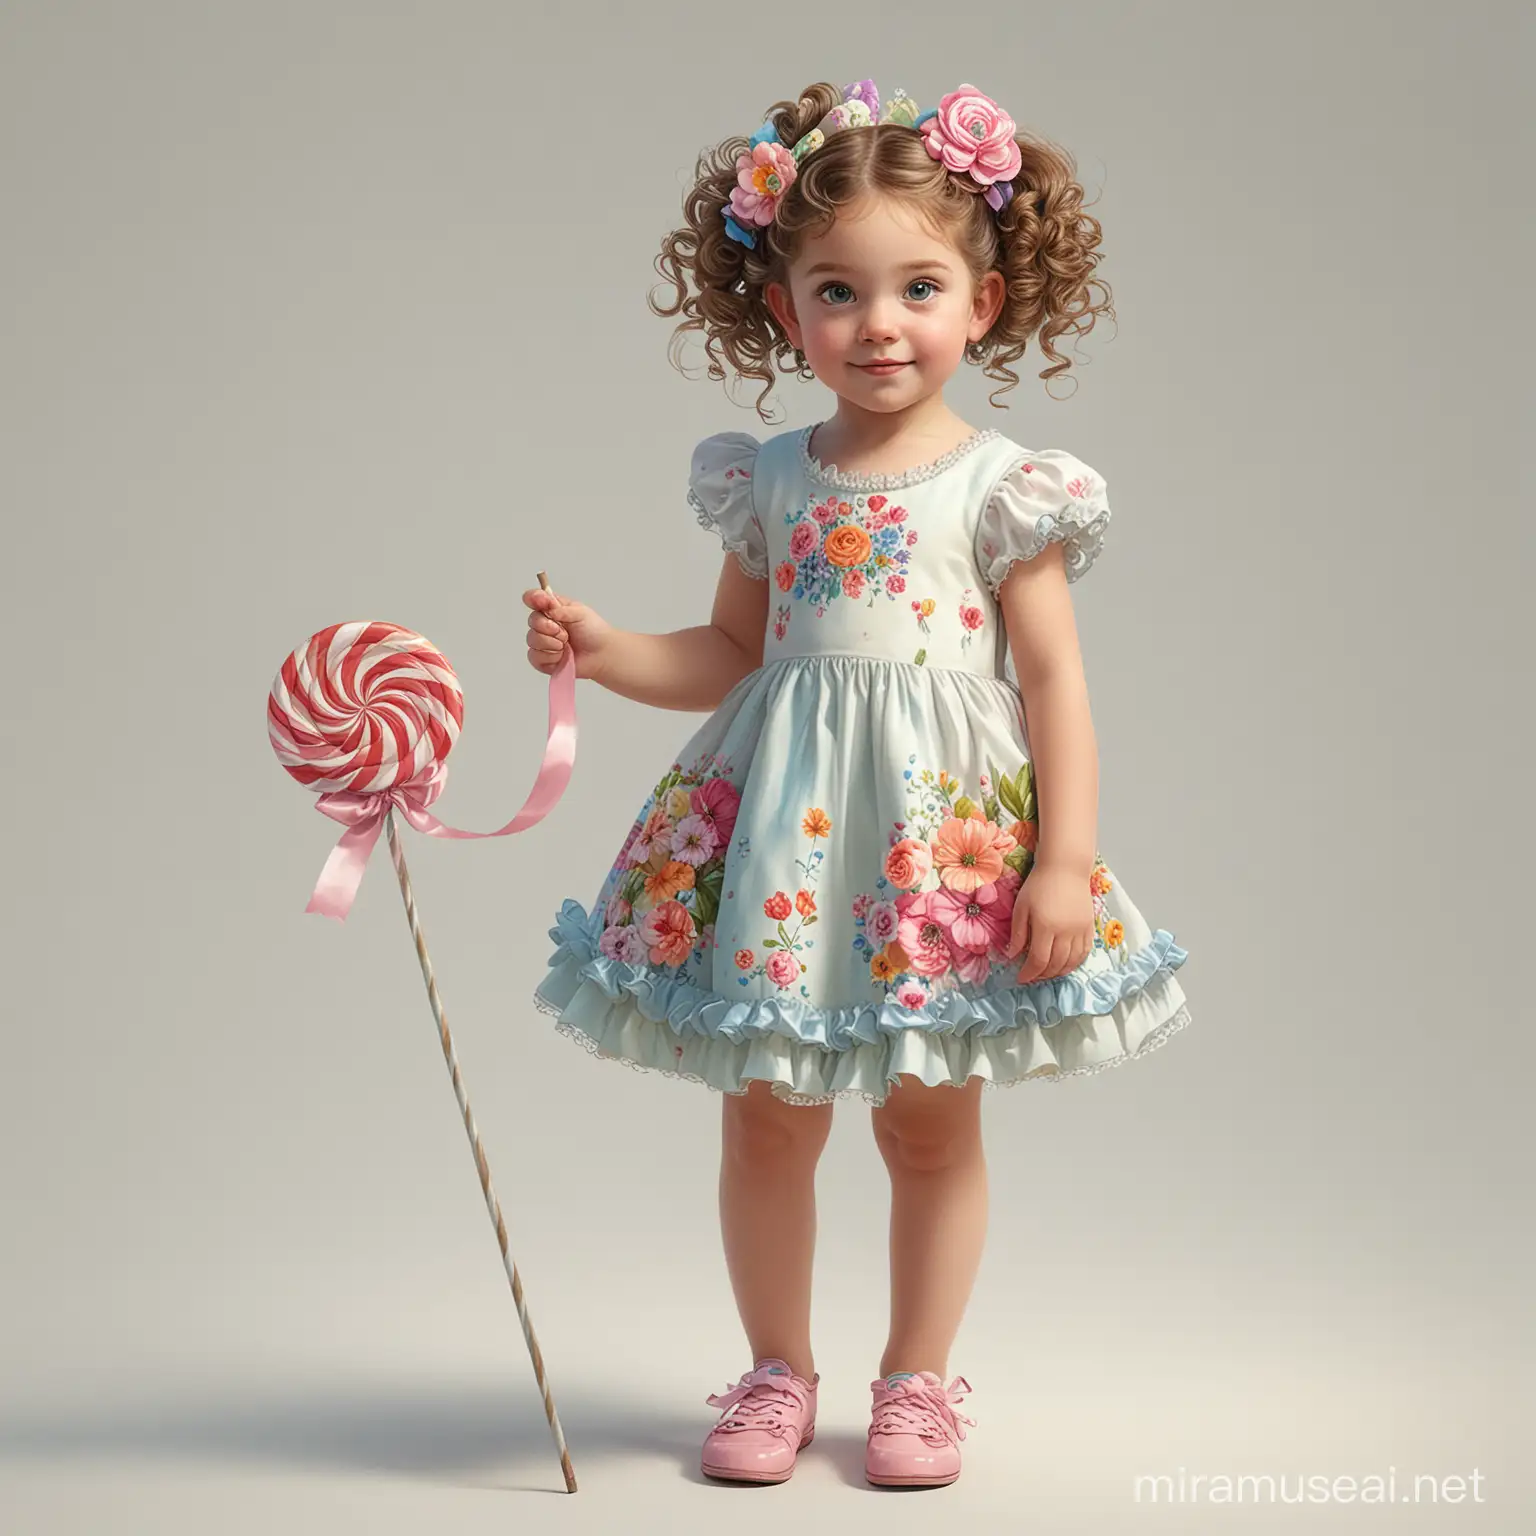 Adorable Little Girl with Flower Adornments and Playful Dress